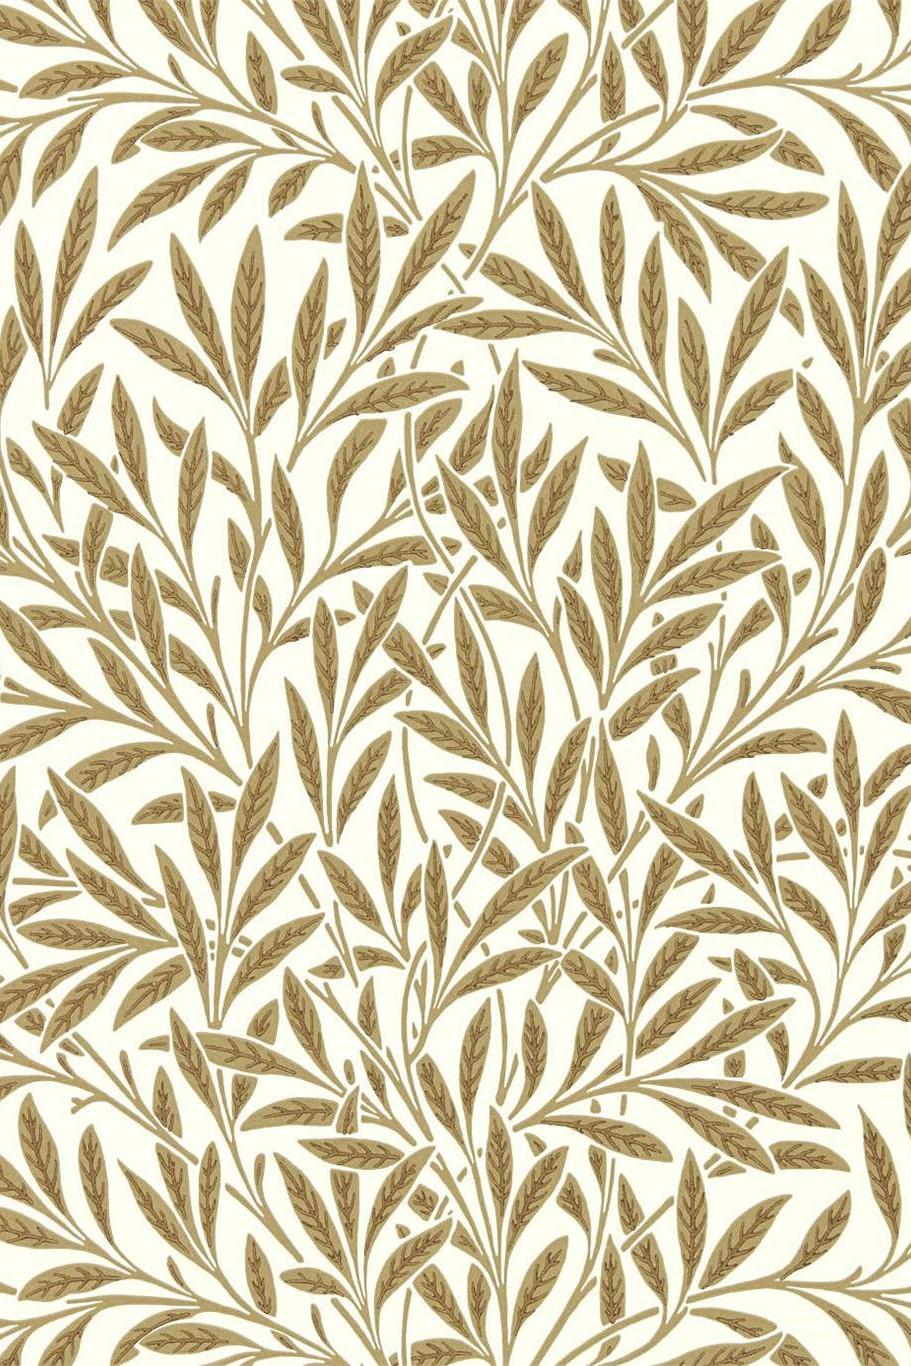 morris-co-queen-square-willow-wallpaper-dbpw216965